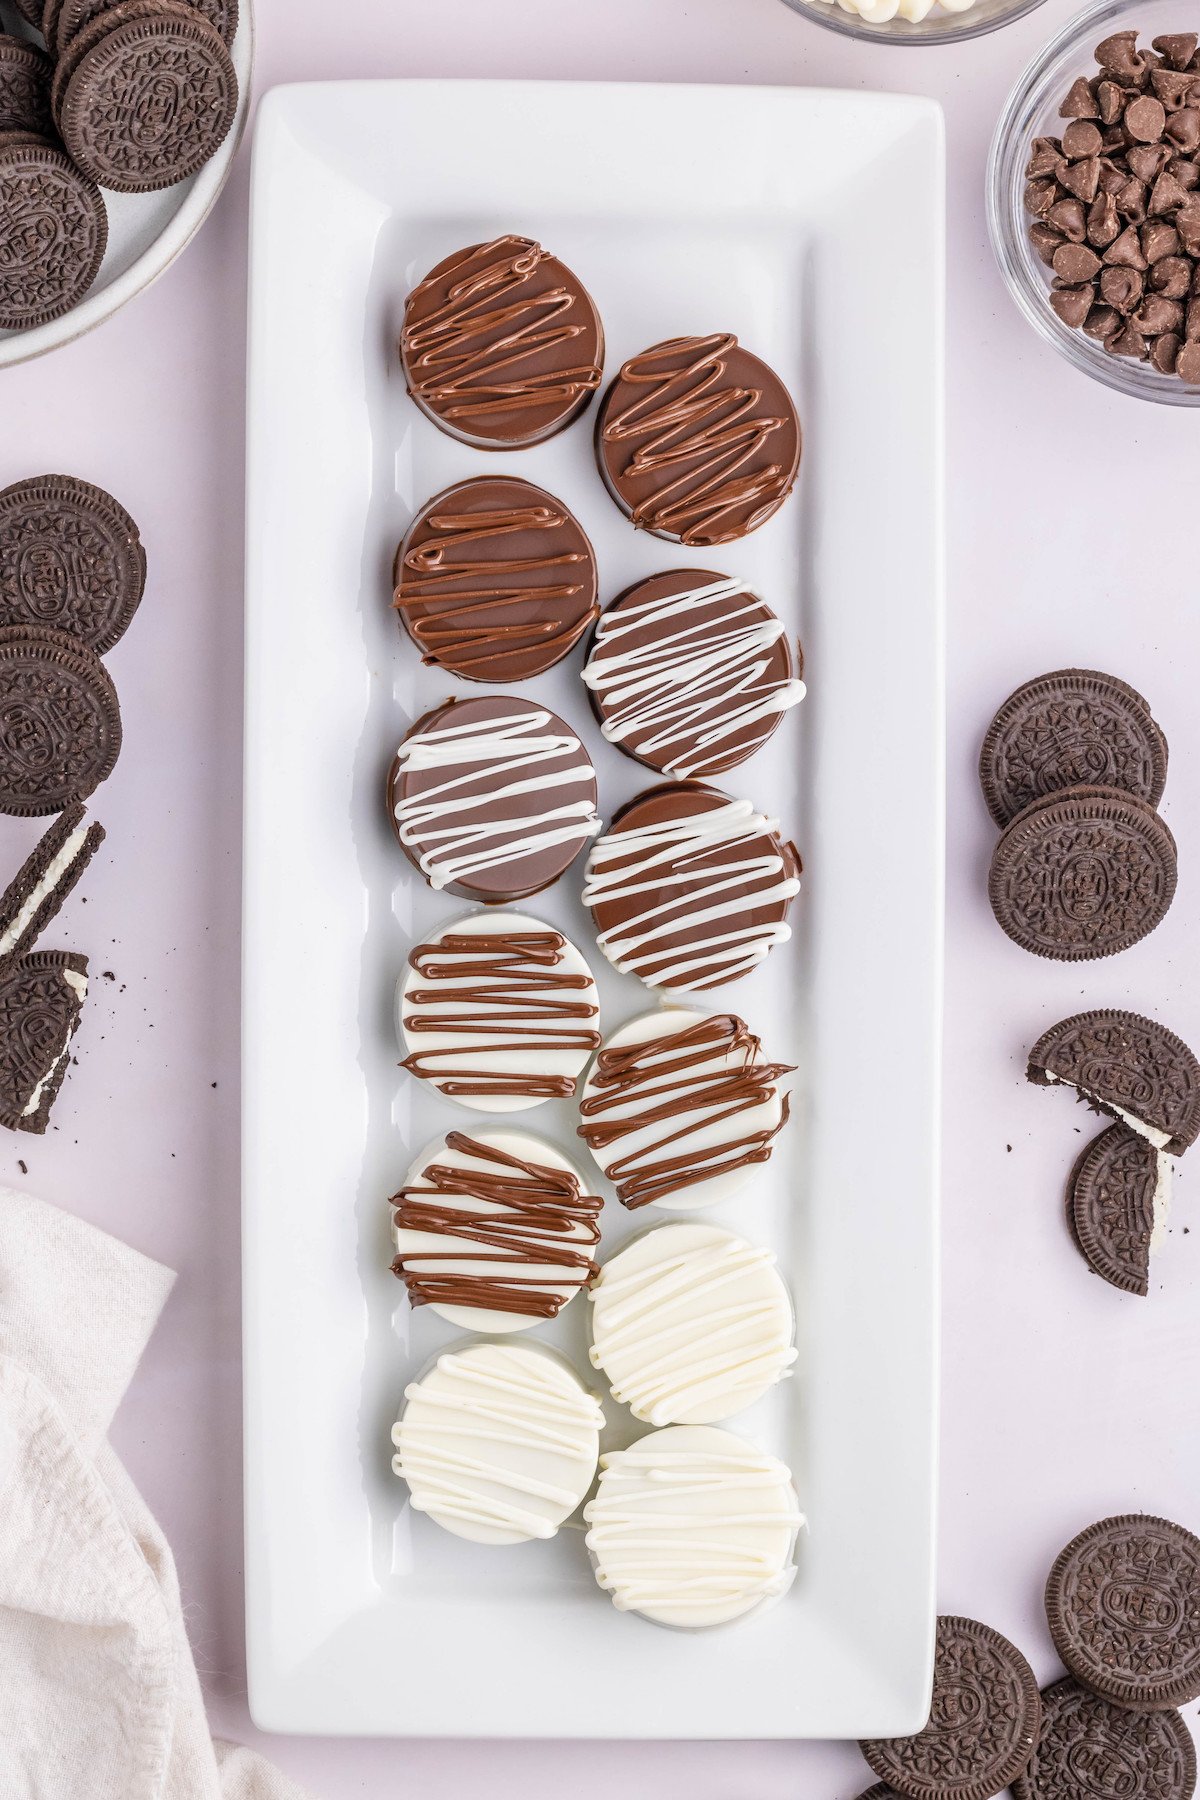 Overhead view of a serving platter filled with white and milk chocolate covered Oreo cookies.